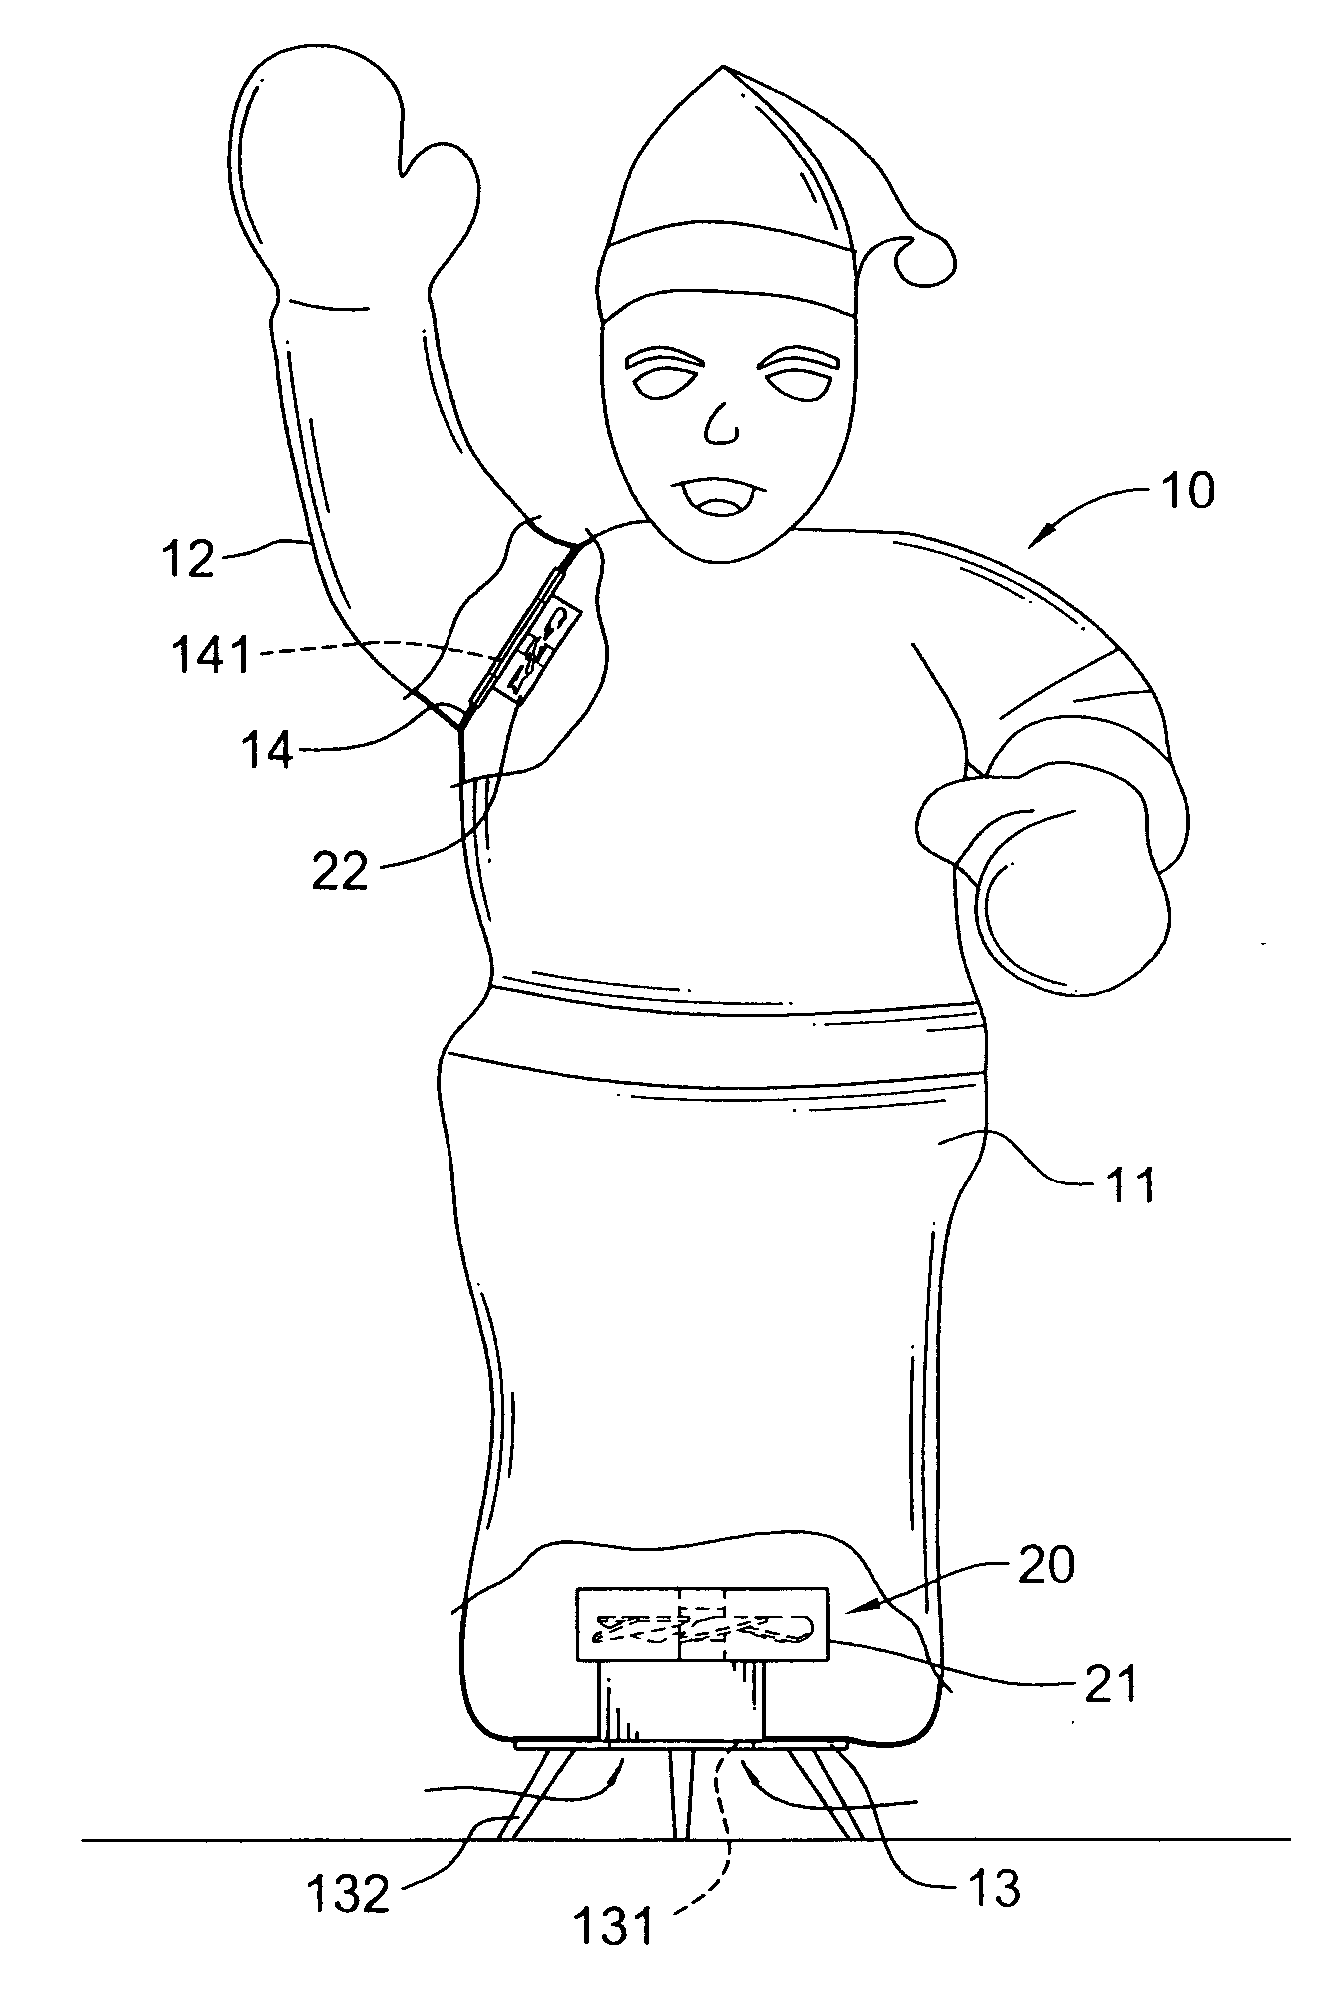 Gesturing inflatable doll